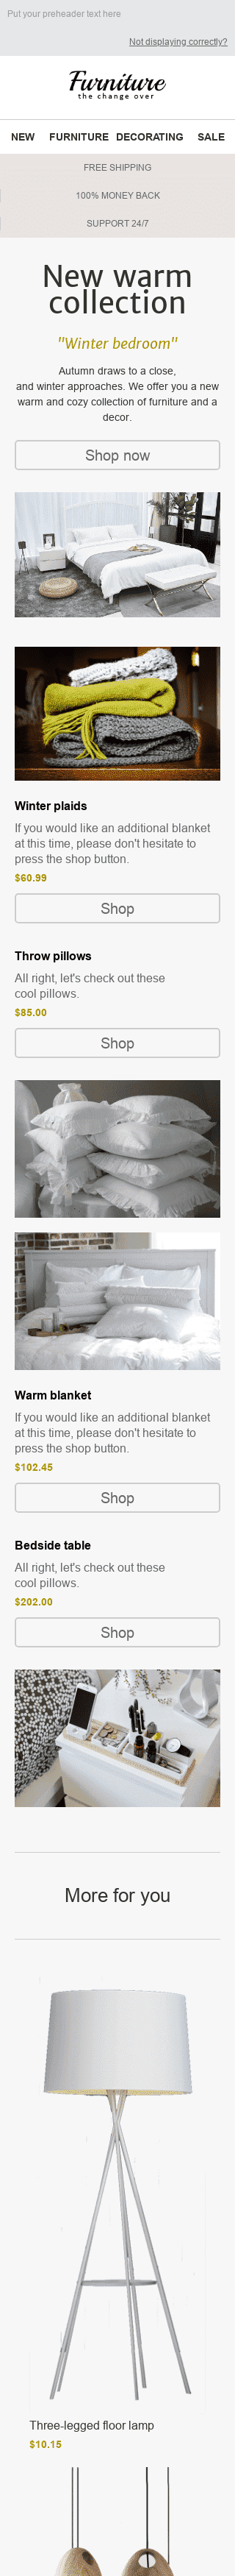 New Collection Email Template "Warm Bedroom" for Furniture, Interior & DIY industry mobile view